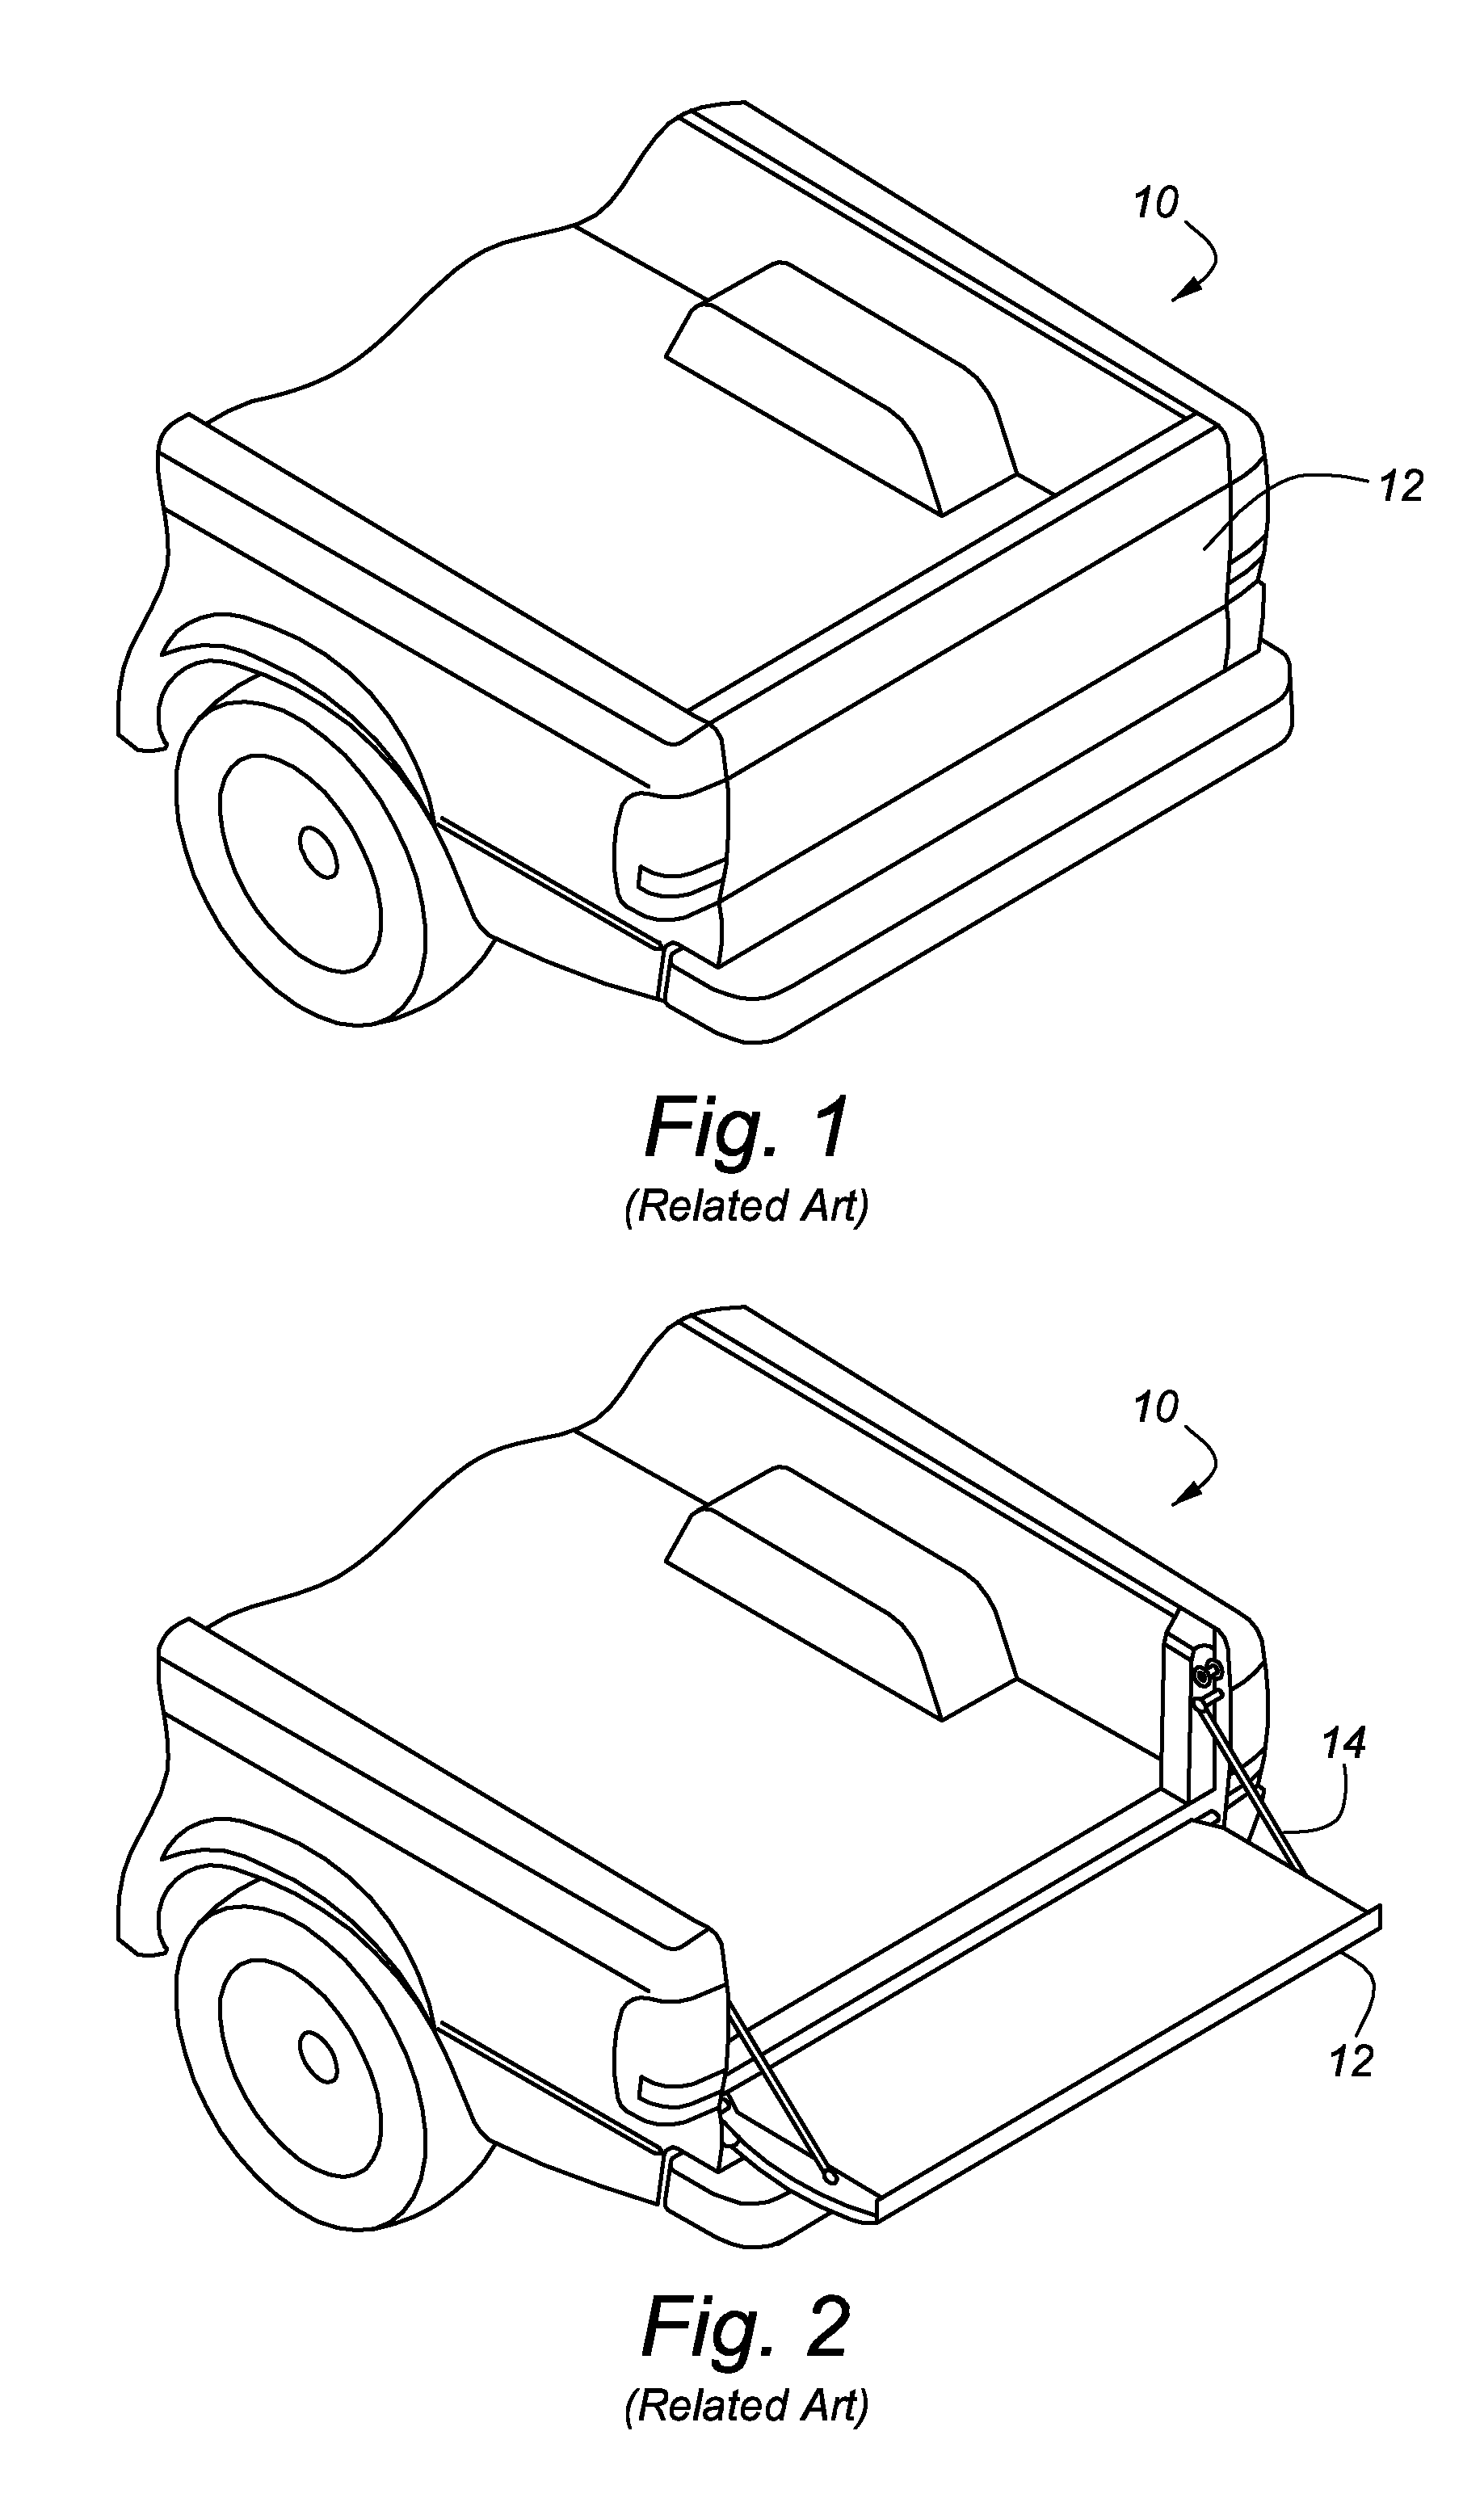 Vehicle tailgate movement assist mechanism using four bar linkage and strut